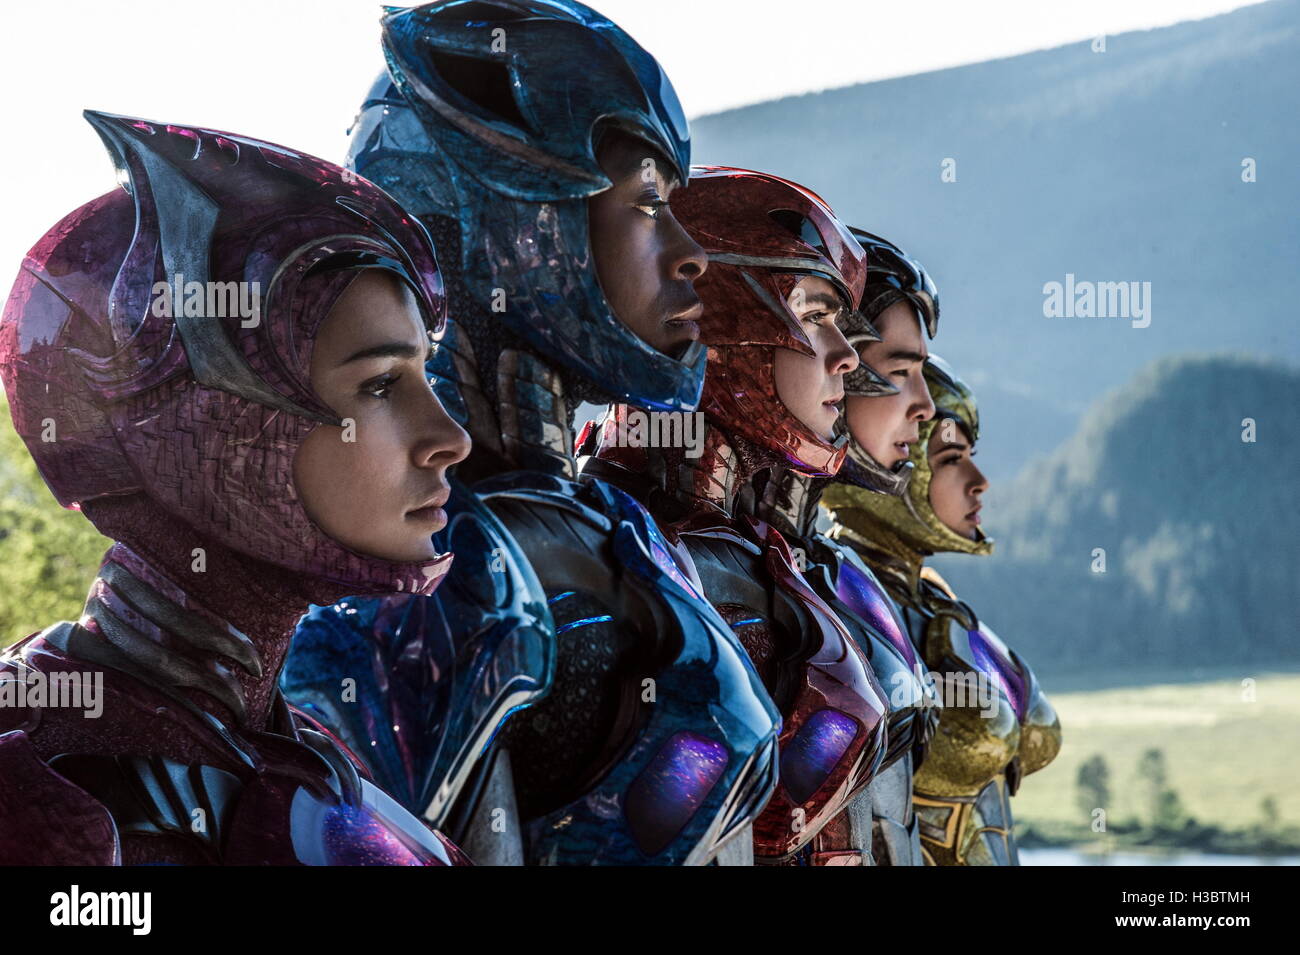 RELEASE DATE: March 24, 2017 TITLE: Power Rangers STUDIO: Lionsgate DIRECTOR: Dean Israelite PLOT: A group of high-school kids, who are infused with unique superpowers, harness their abilities in order to save the world STARRING: Becky G., Ludi Lin, Dacre Montgomery, Naomi Scott, RJ Cyler (Credit: c Lionsgate/Entertainment Pictures/) Stock Photo